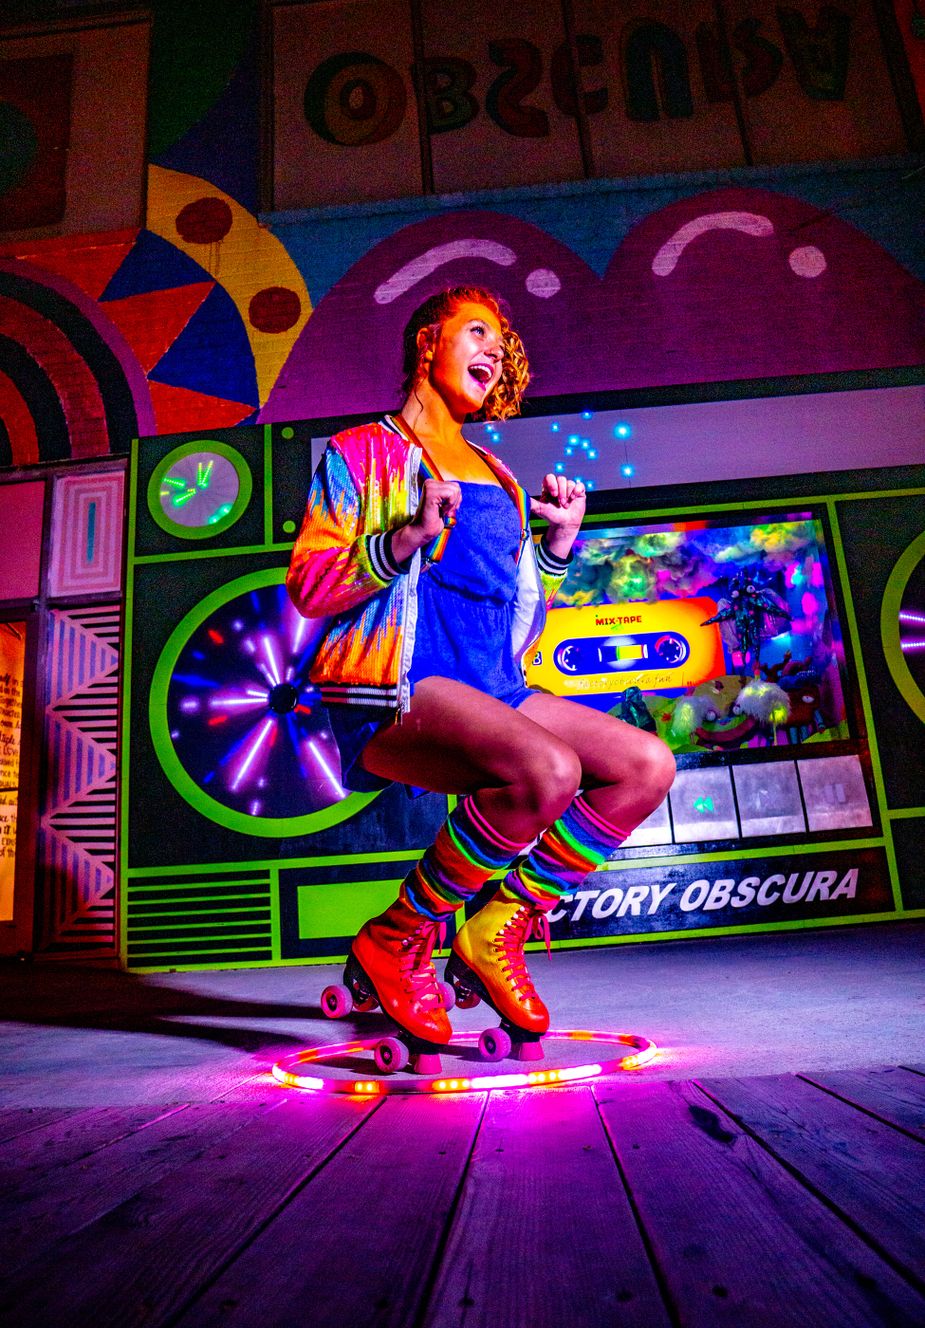 Perpetual Motion dancer Stormi Luney performs in front of Factory Obscura's Mix-Tape for "REWIND." Photo by Todd Clark